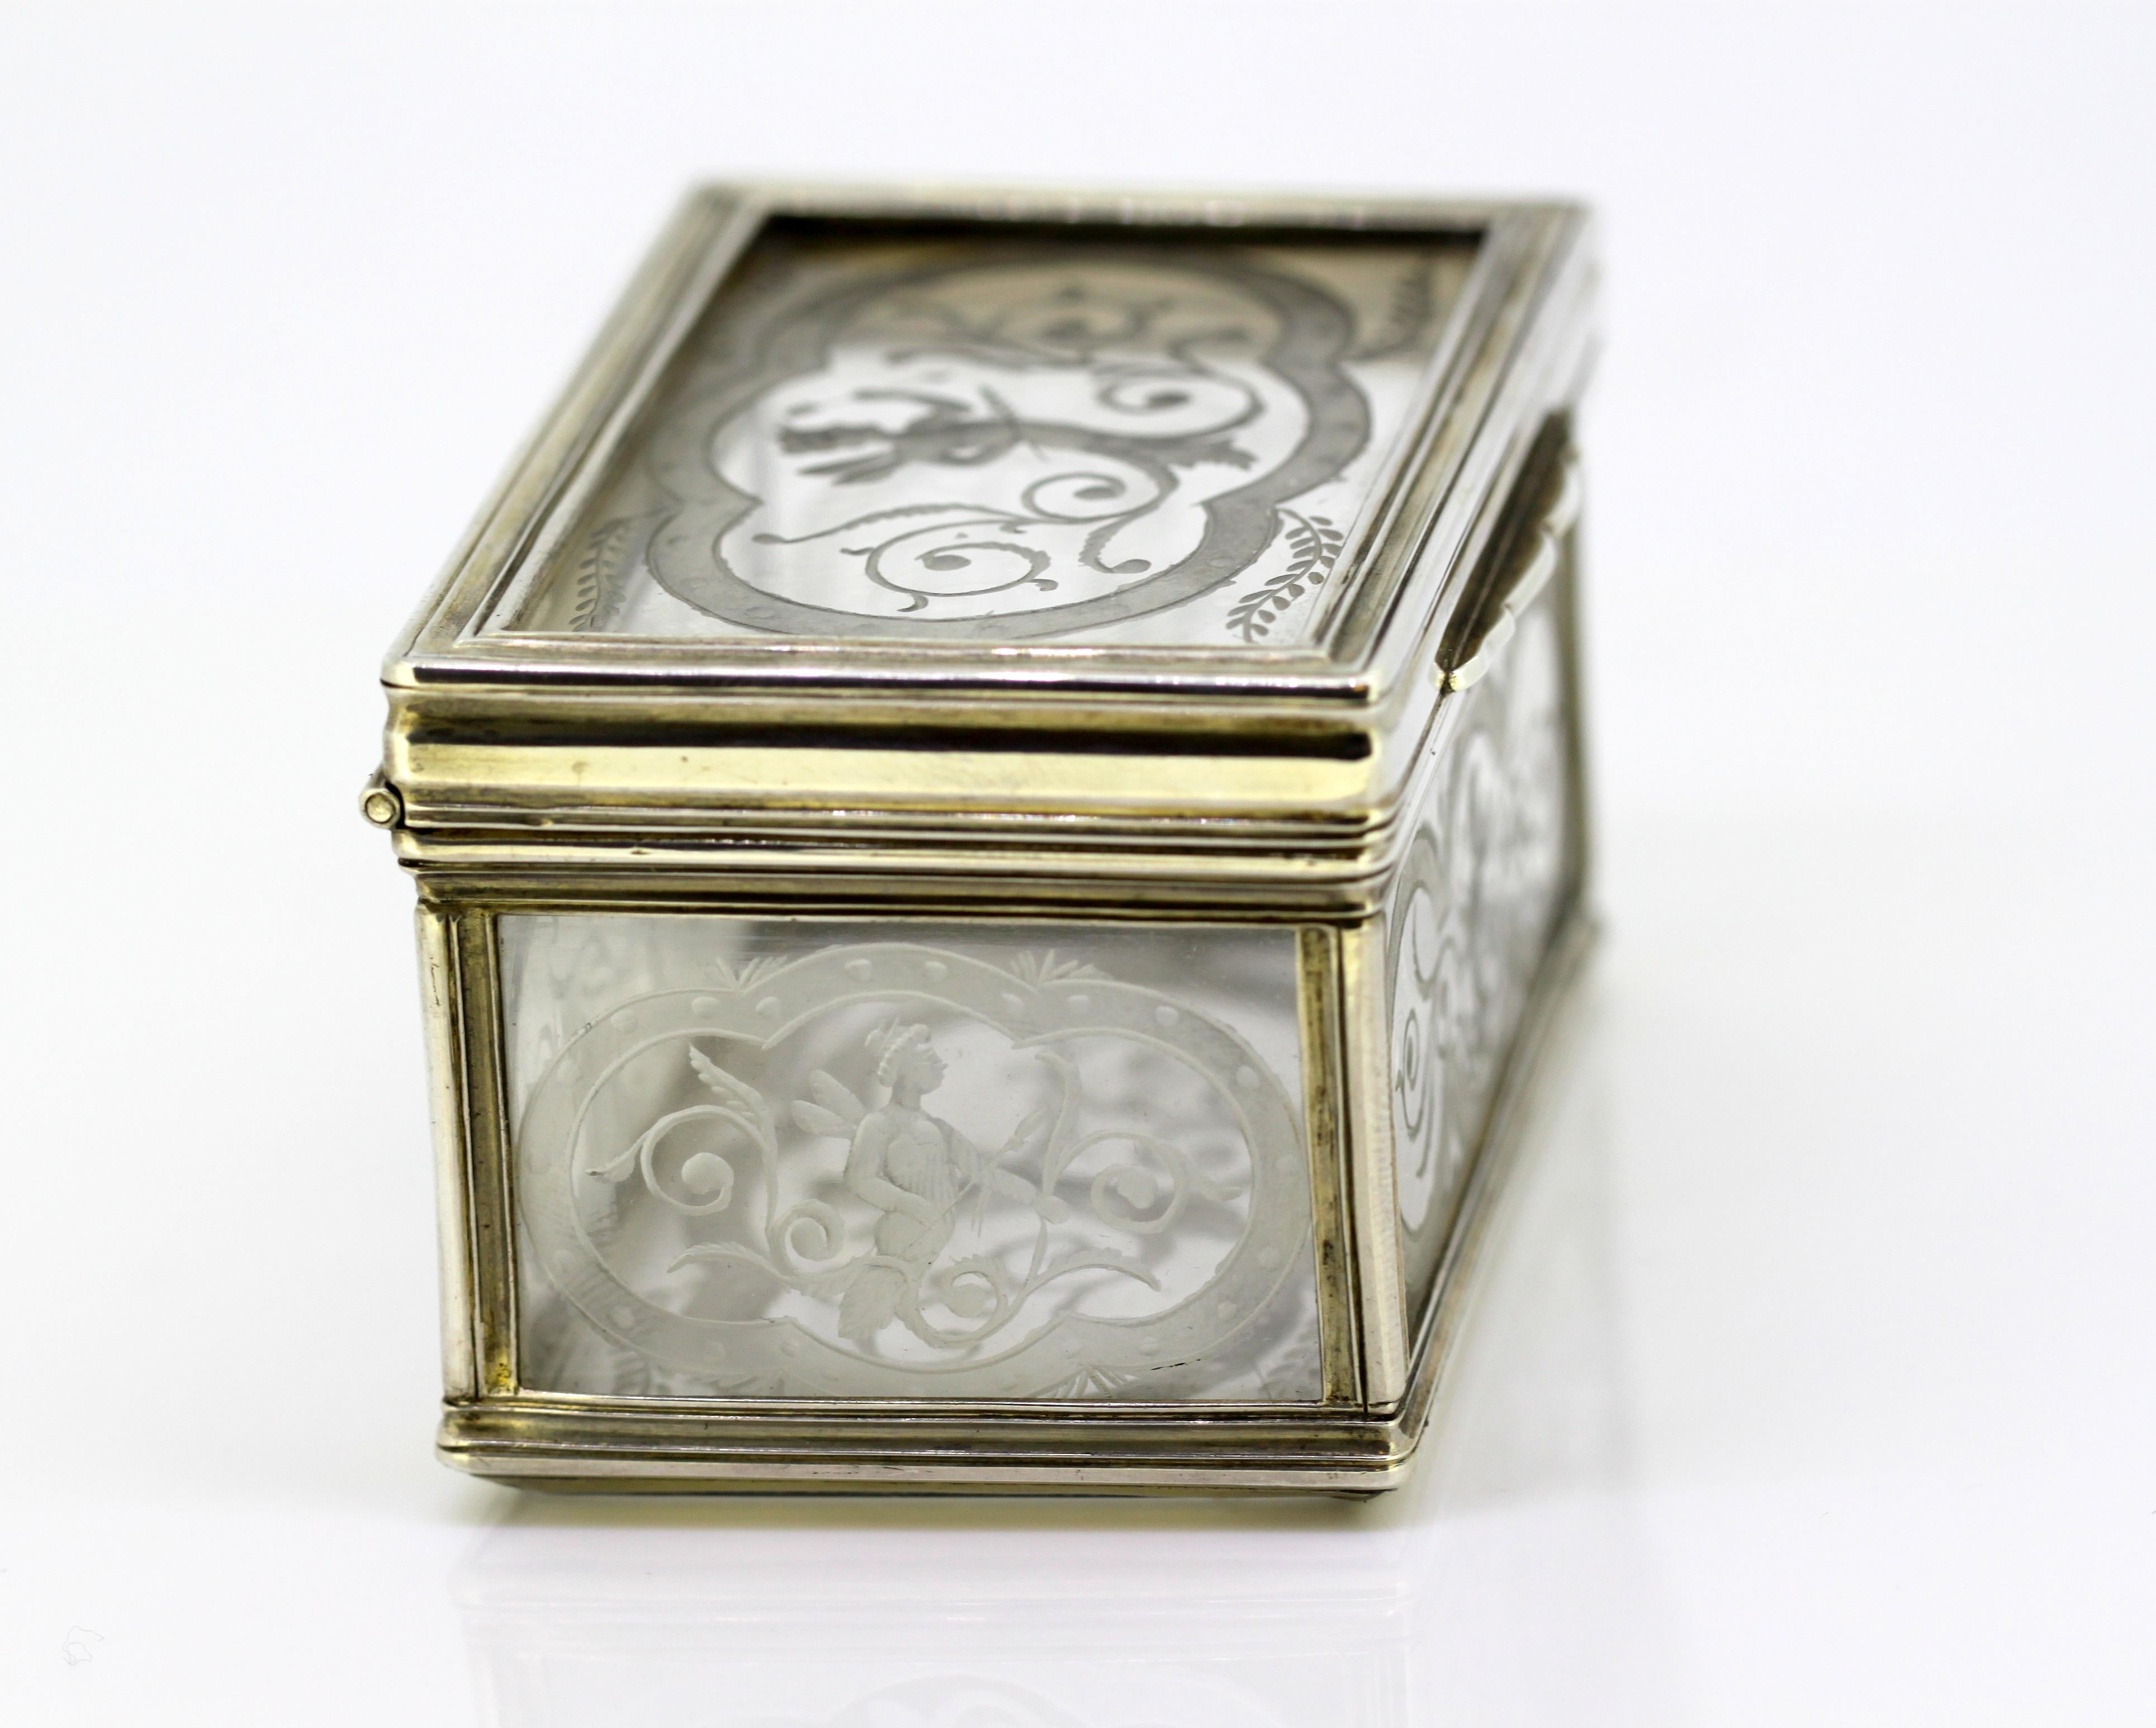 Antique crystal glass and silver snuff / pill box. ecorated with various angelic cherub like figures and floral scriptures.

Made in France, 17th century, circa 1680.

Dimensions: 
Length 7.8 cm
Width 5 cm
Height 4.6 cm
Weight 189